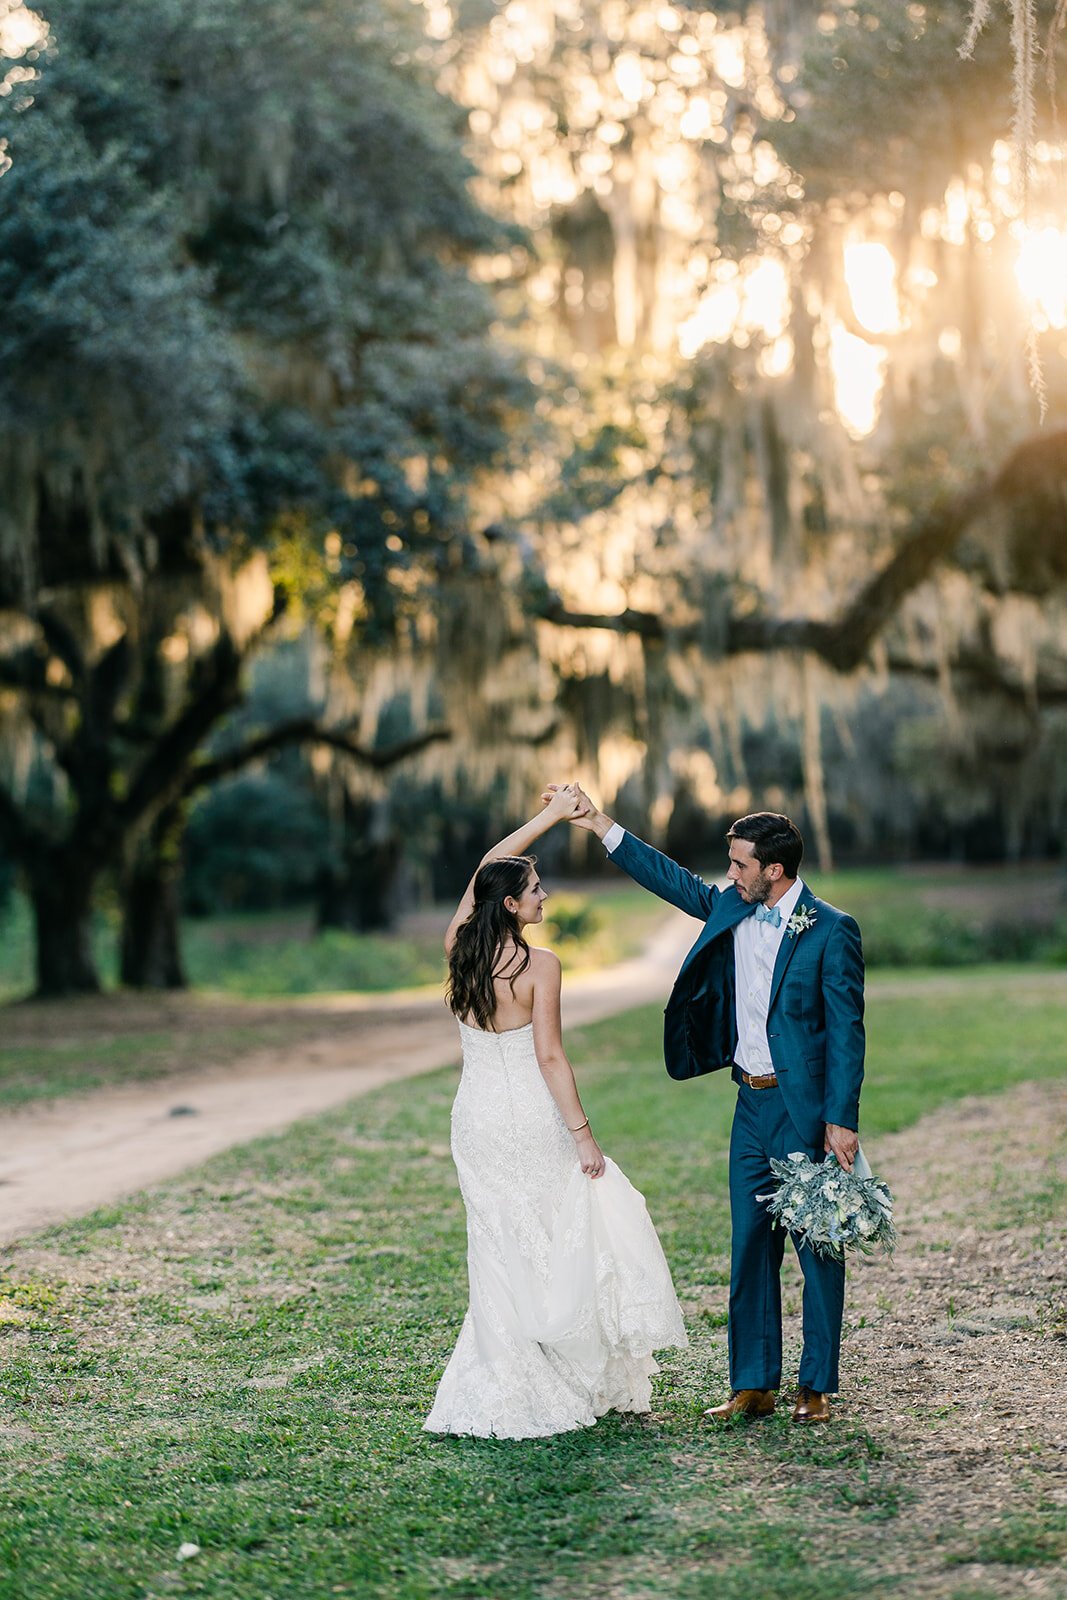 ivory-and-beau-bride-down-for-the-gown-liz-real-bride-blog-southern-bride-maggie-sottero-wedding-dress-bridal-gown-wedding-gown-bridal-shop-bridal-boutique-bridal-shopping-bridal-style-bridal-inspo-savannah-georgia-431A1794.jpg